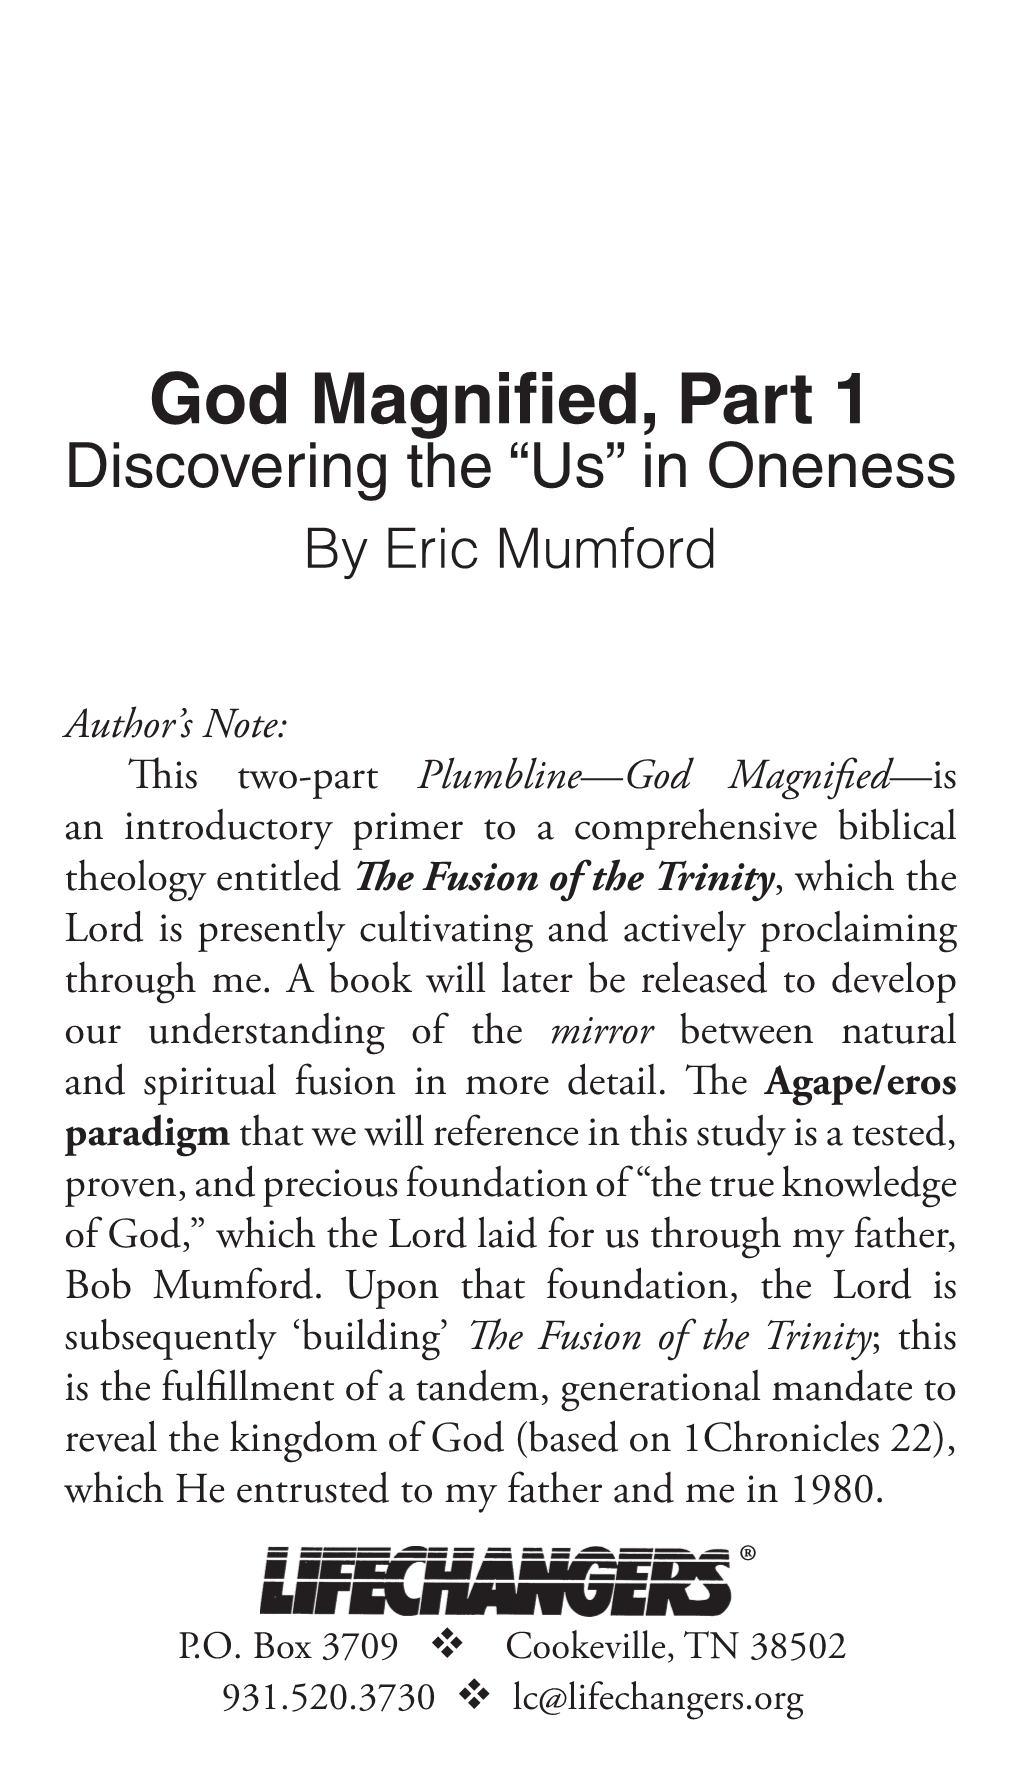 God Magnified, Part 1 Discovering the “Us” in Oneness by Eric Mumford